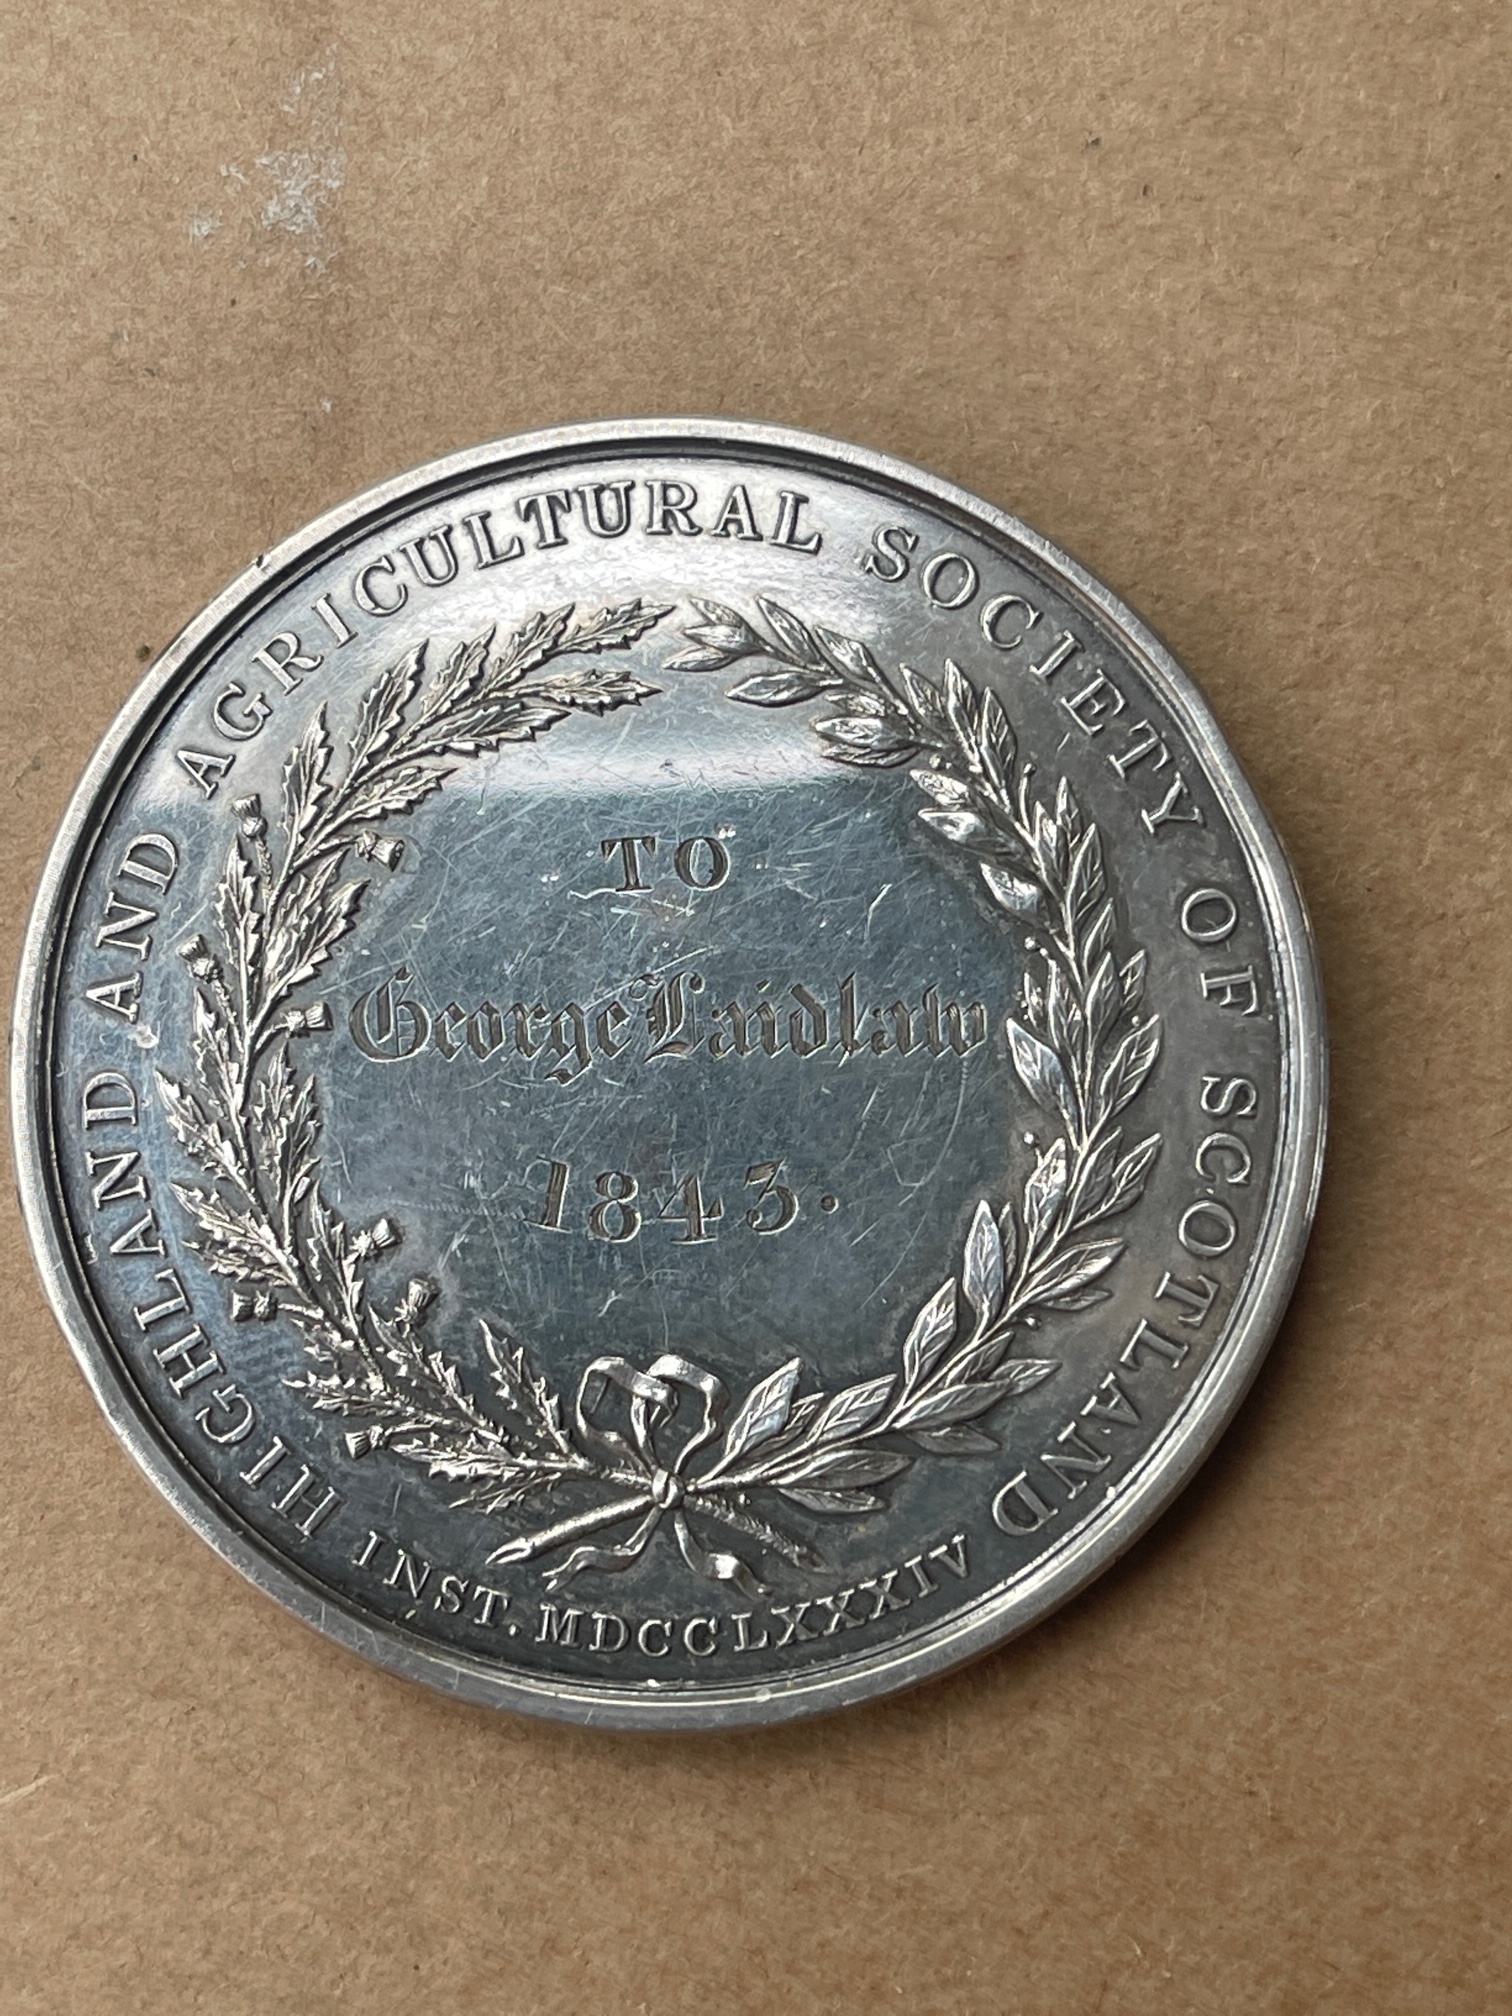 Lot of 2 Agricultural Medals dated 1843 and 1855 - 44mm diameter. - Image 2 of 5